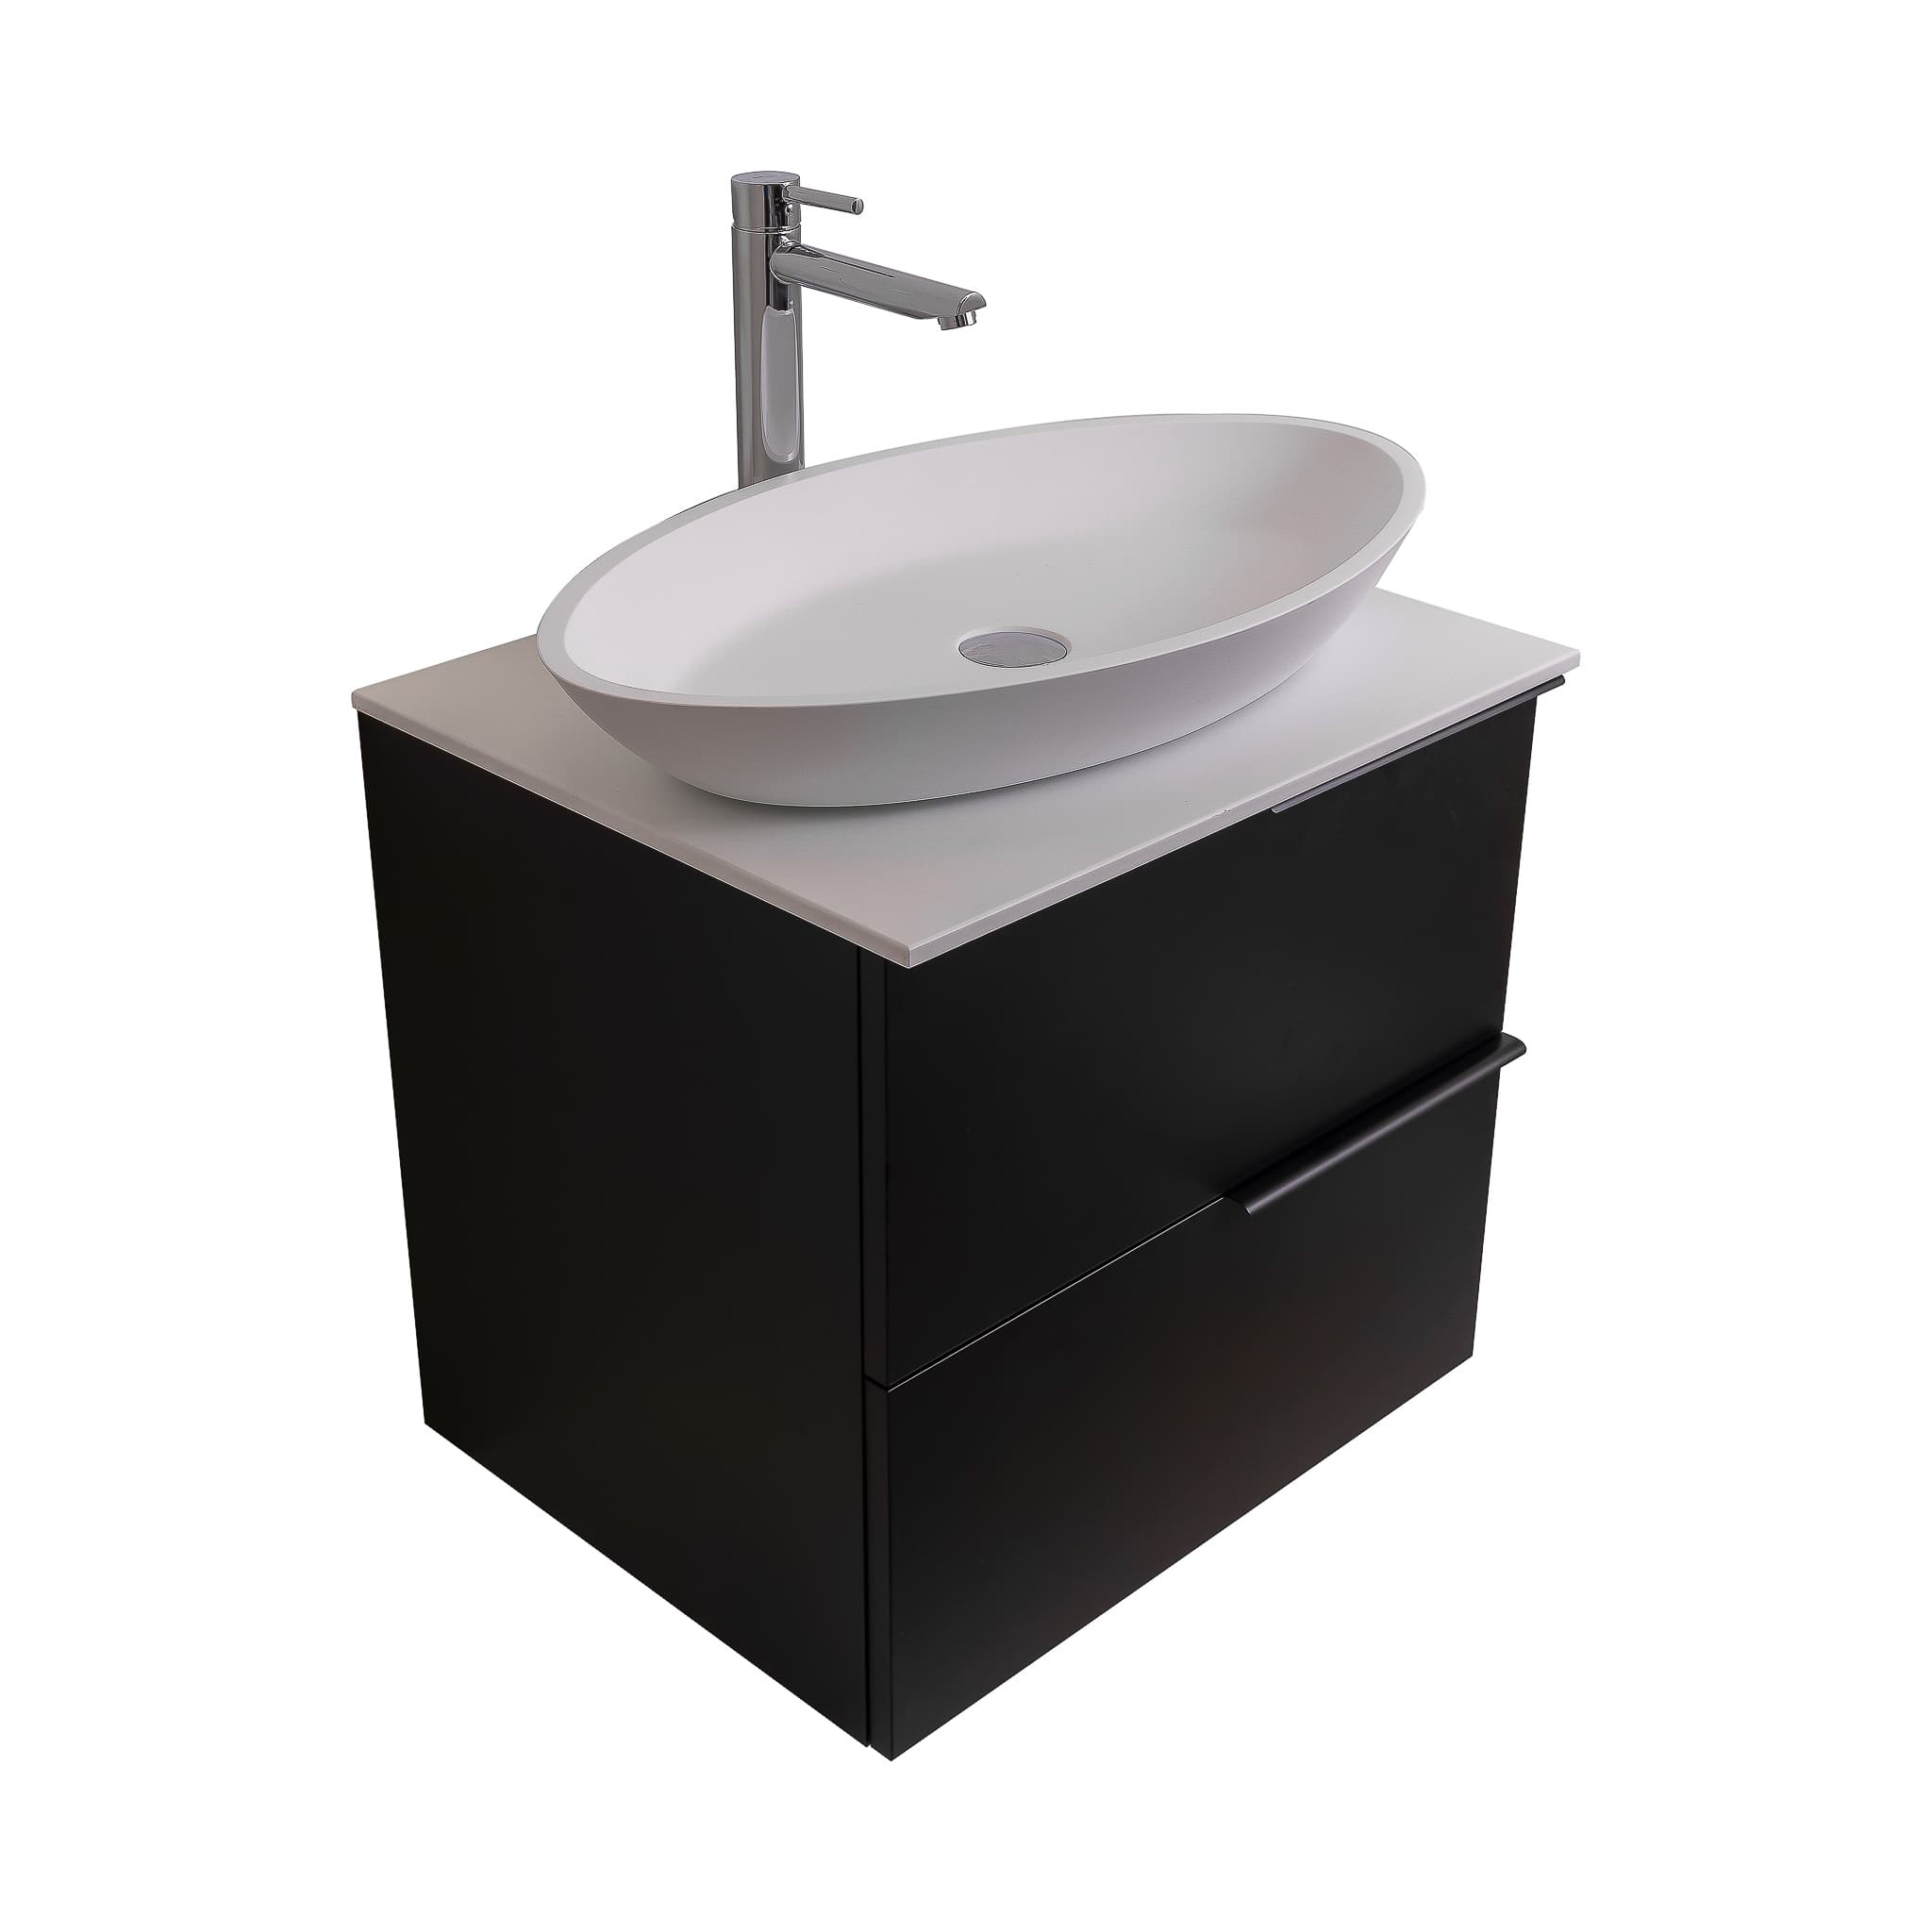 Mallorca 23.5 Matte Black Cabinet, Solid Surface Flat White Counter And Oval Solid Surface White Basin 1305, Wall Mounted Modern Vanity Set